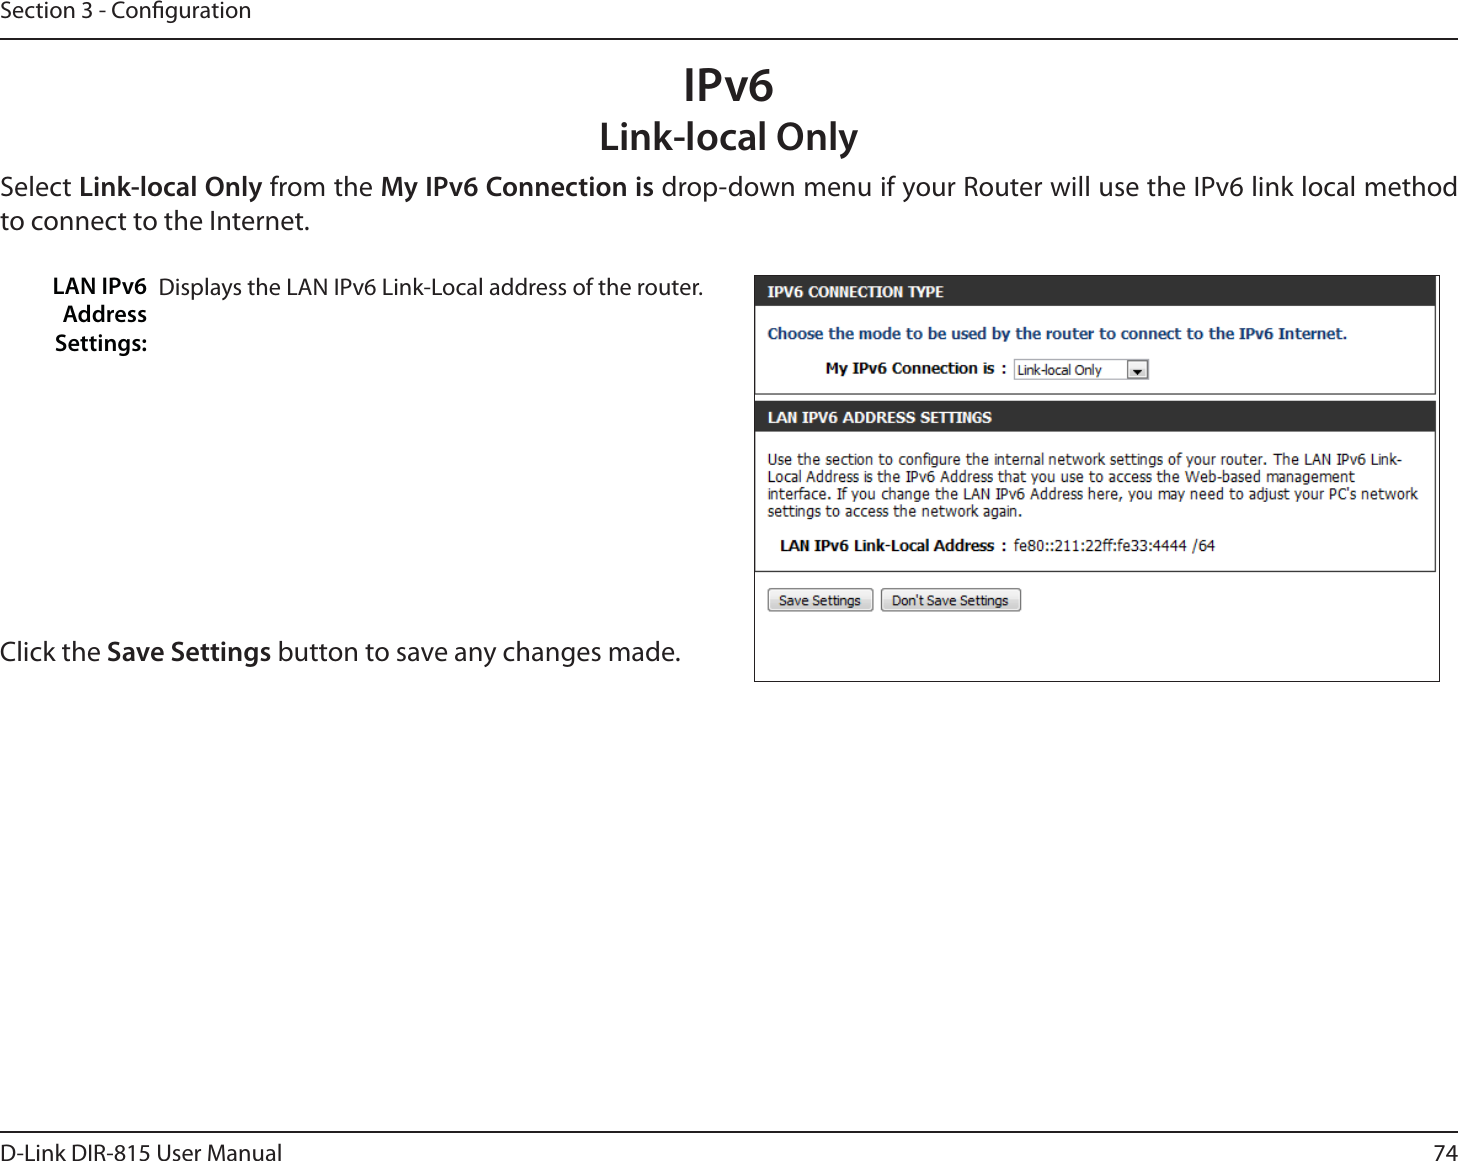 74D-Link DIR-815 User ManualSection 3 - CongurationDisplays the LAN IPv6 Link-Local address of the router.LAN IPv6 Address Settings:IPv6Link-local OnlySelect Link-local Only from the My IPv6 Connection is drop-down menu if your Router will use the IPv6 link local method to connect to the Internet.Click the Save Settings button to save any changes made.